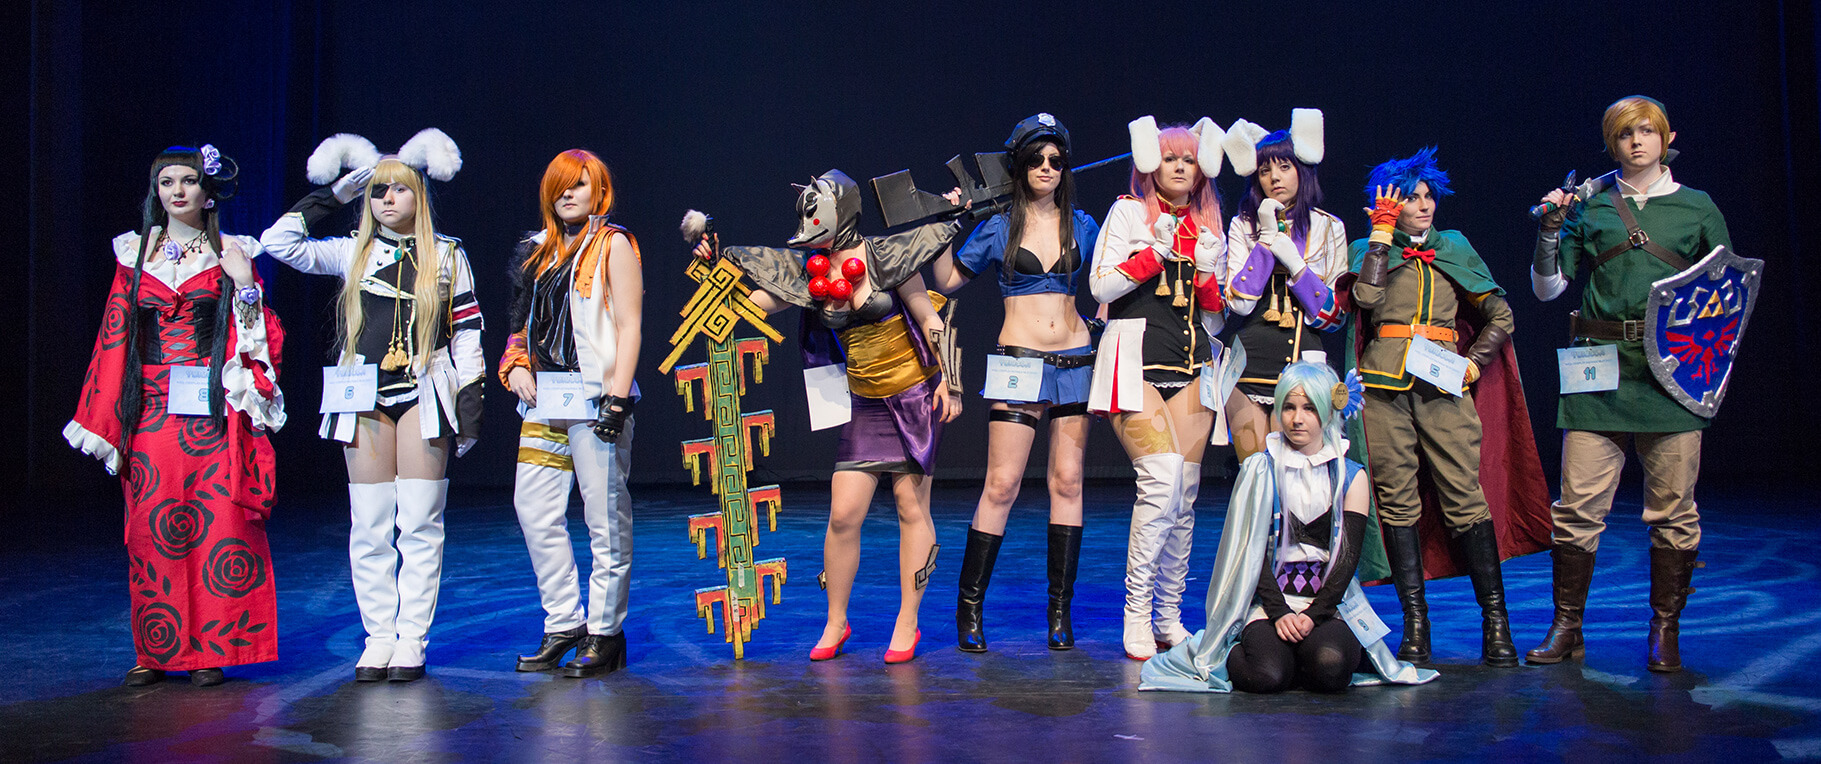 Anime Conventions: A Great Place to Build Confidence as a Photographer |  PetaPixel